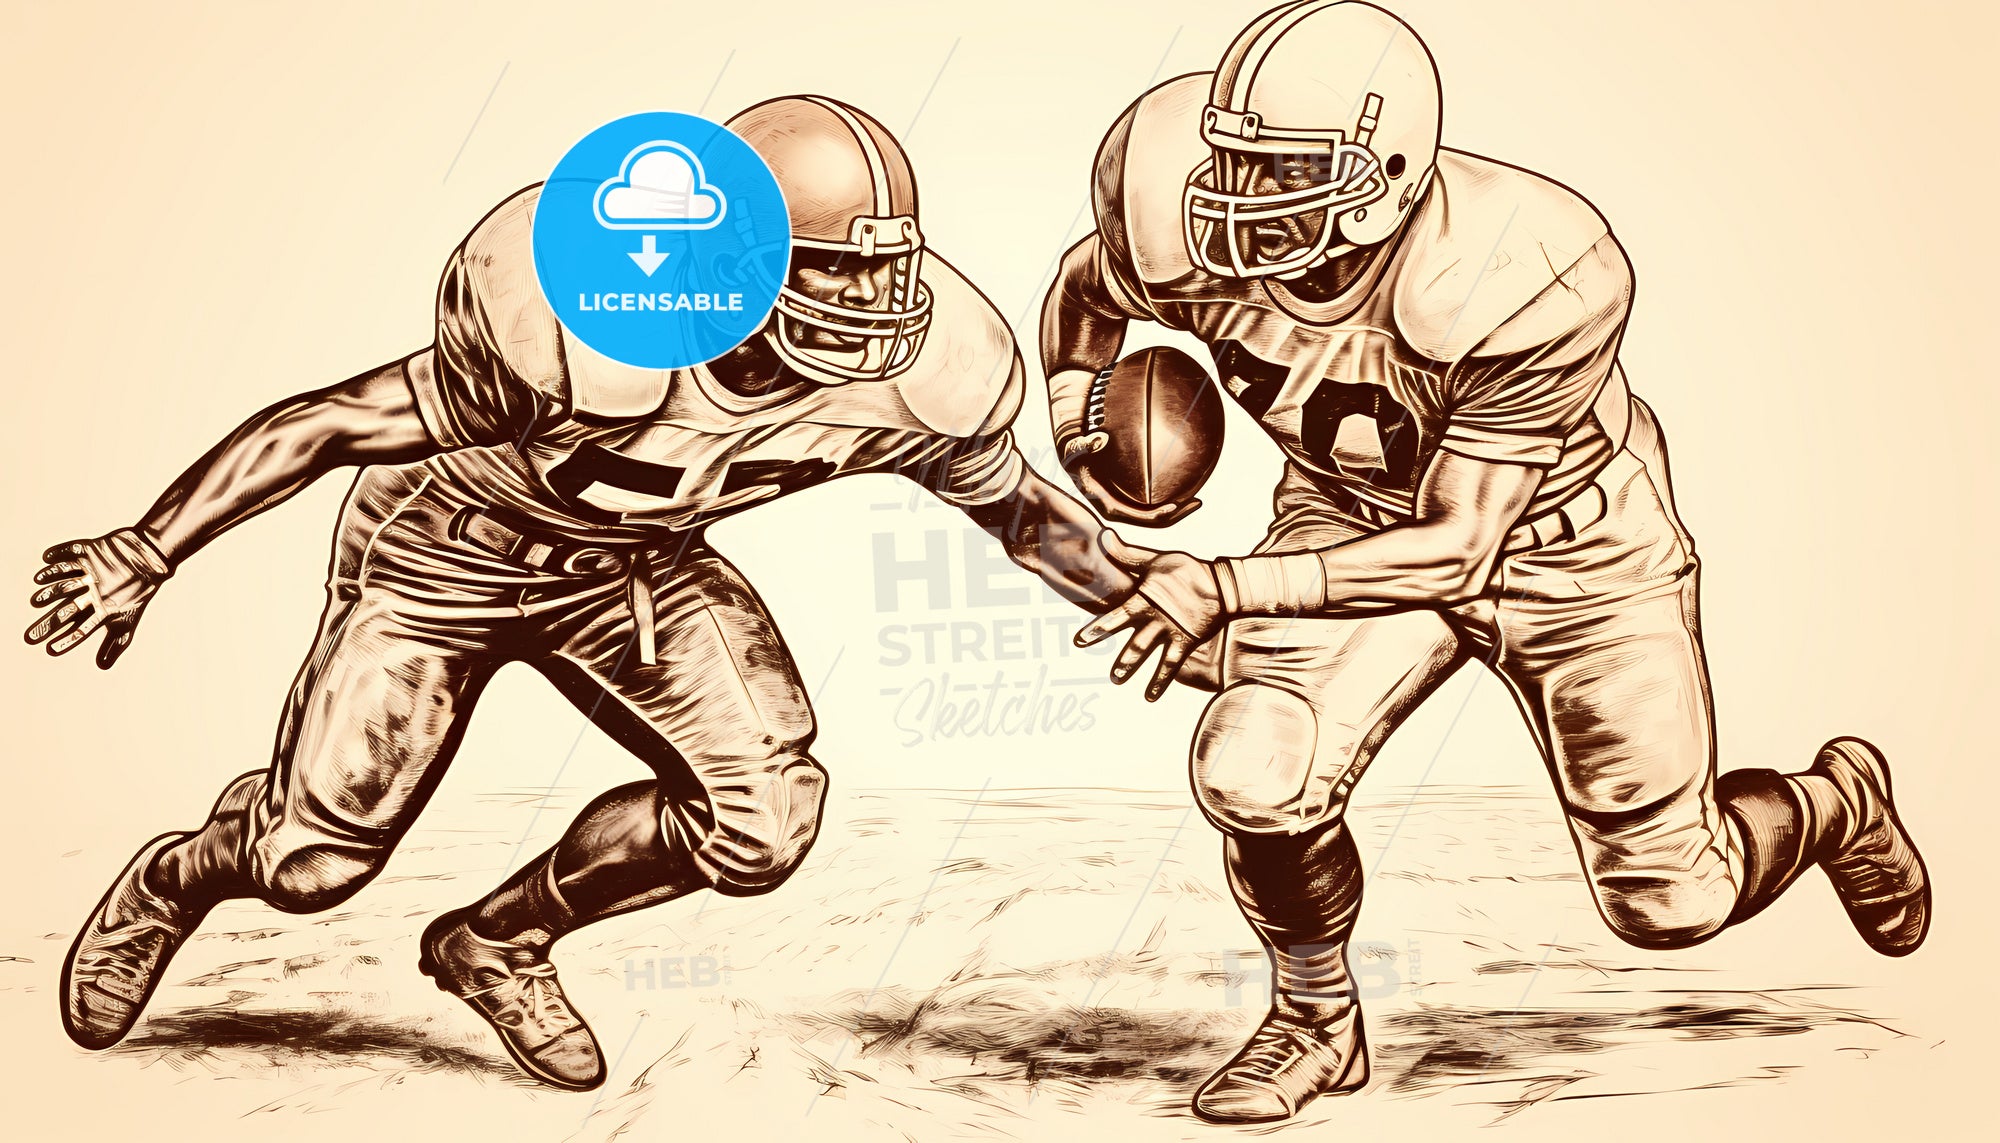 How to Draw Football Players - DrawingNow